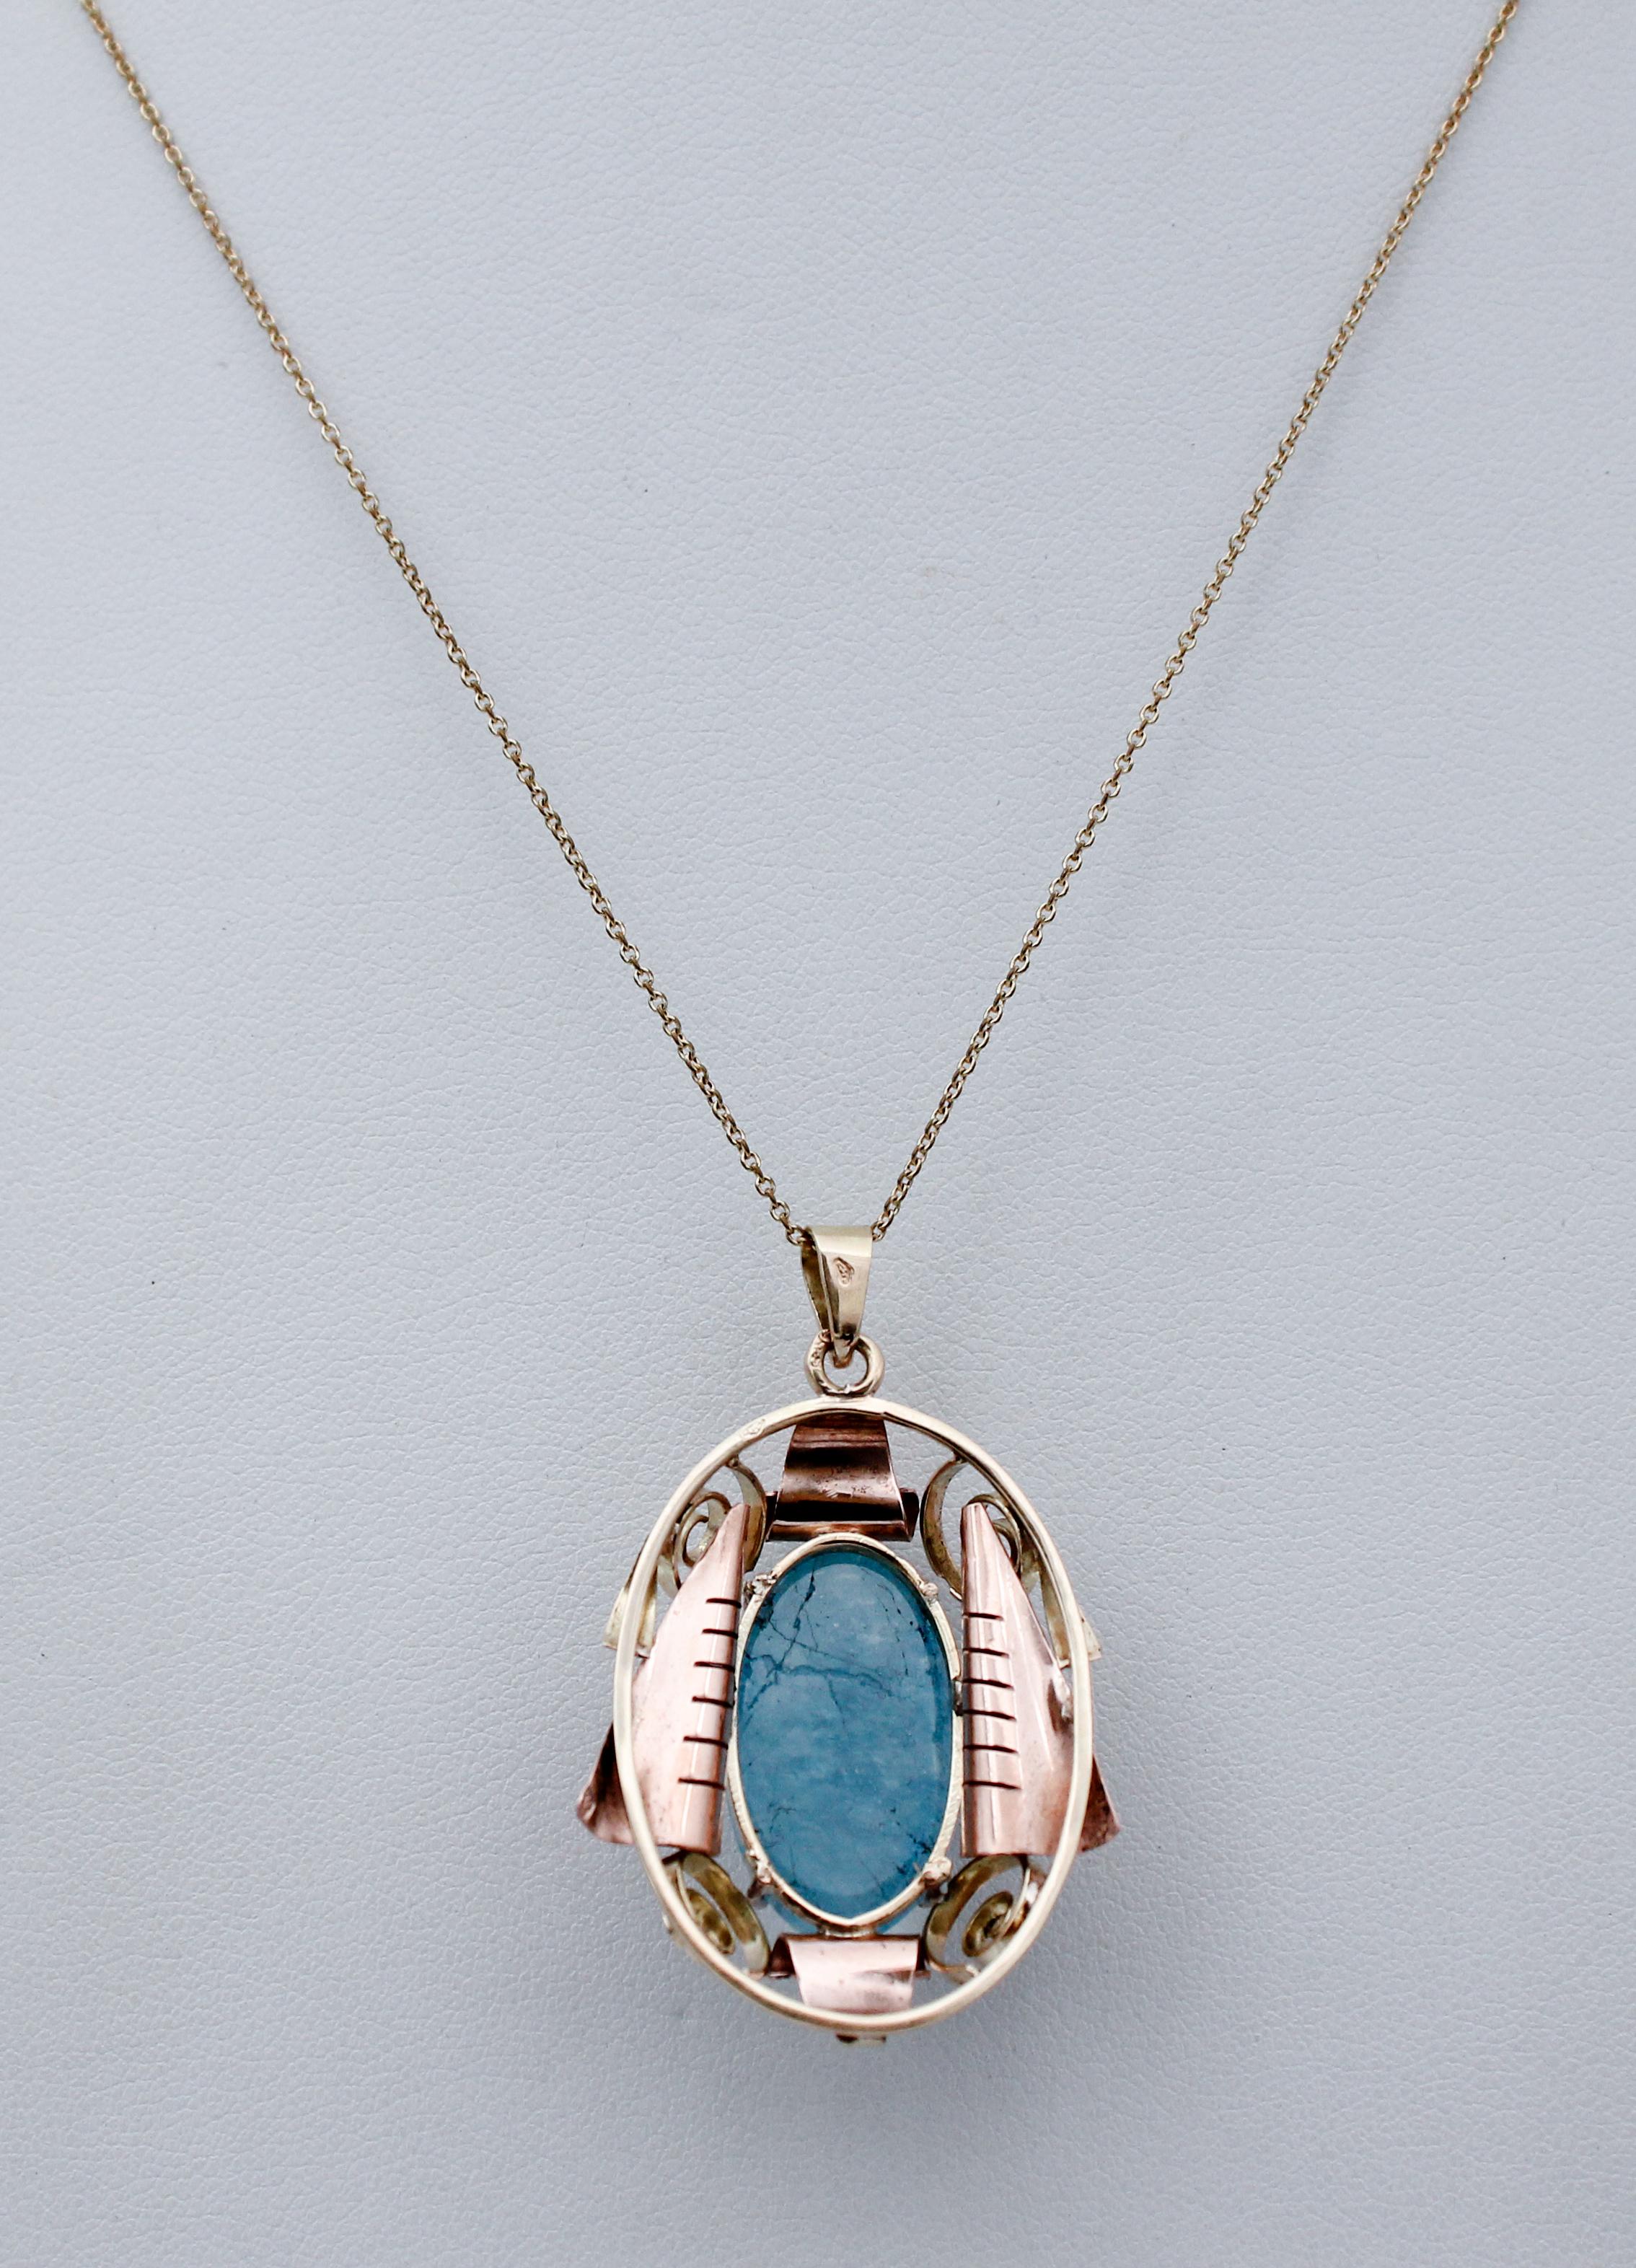 Oval Cut Aquamarine, 9 Karat Rose and Yellow Gold Necklace For Sale